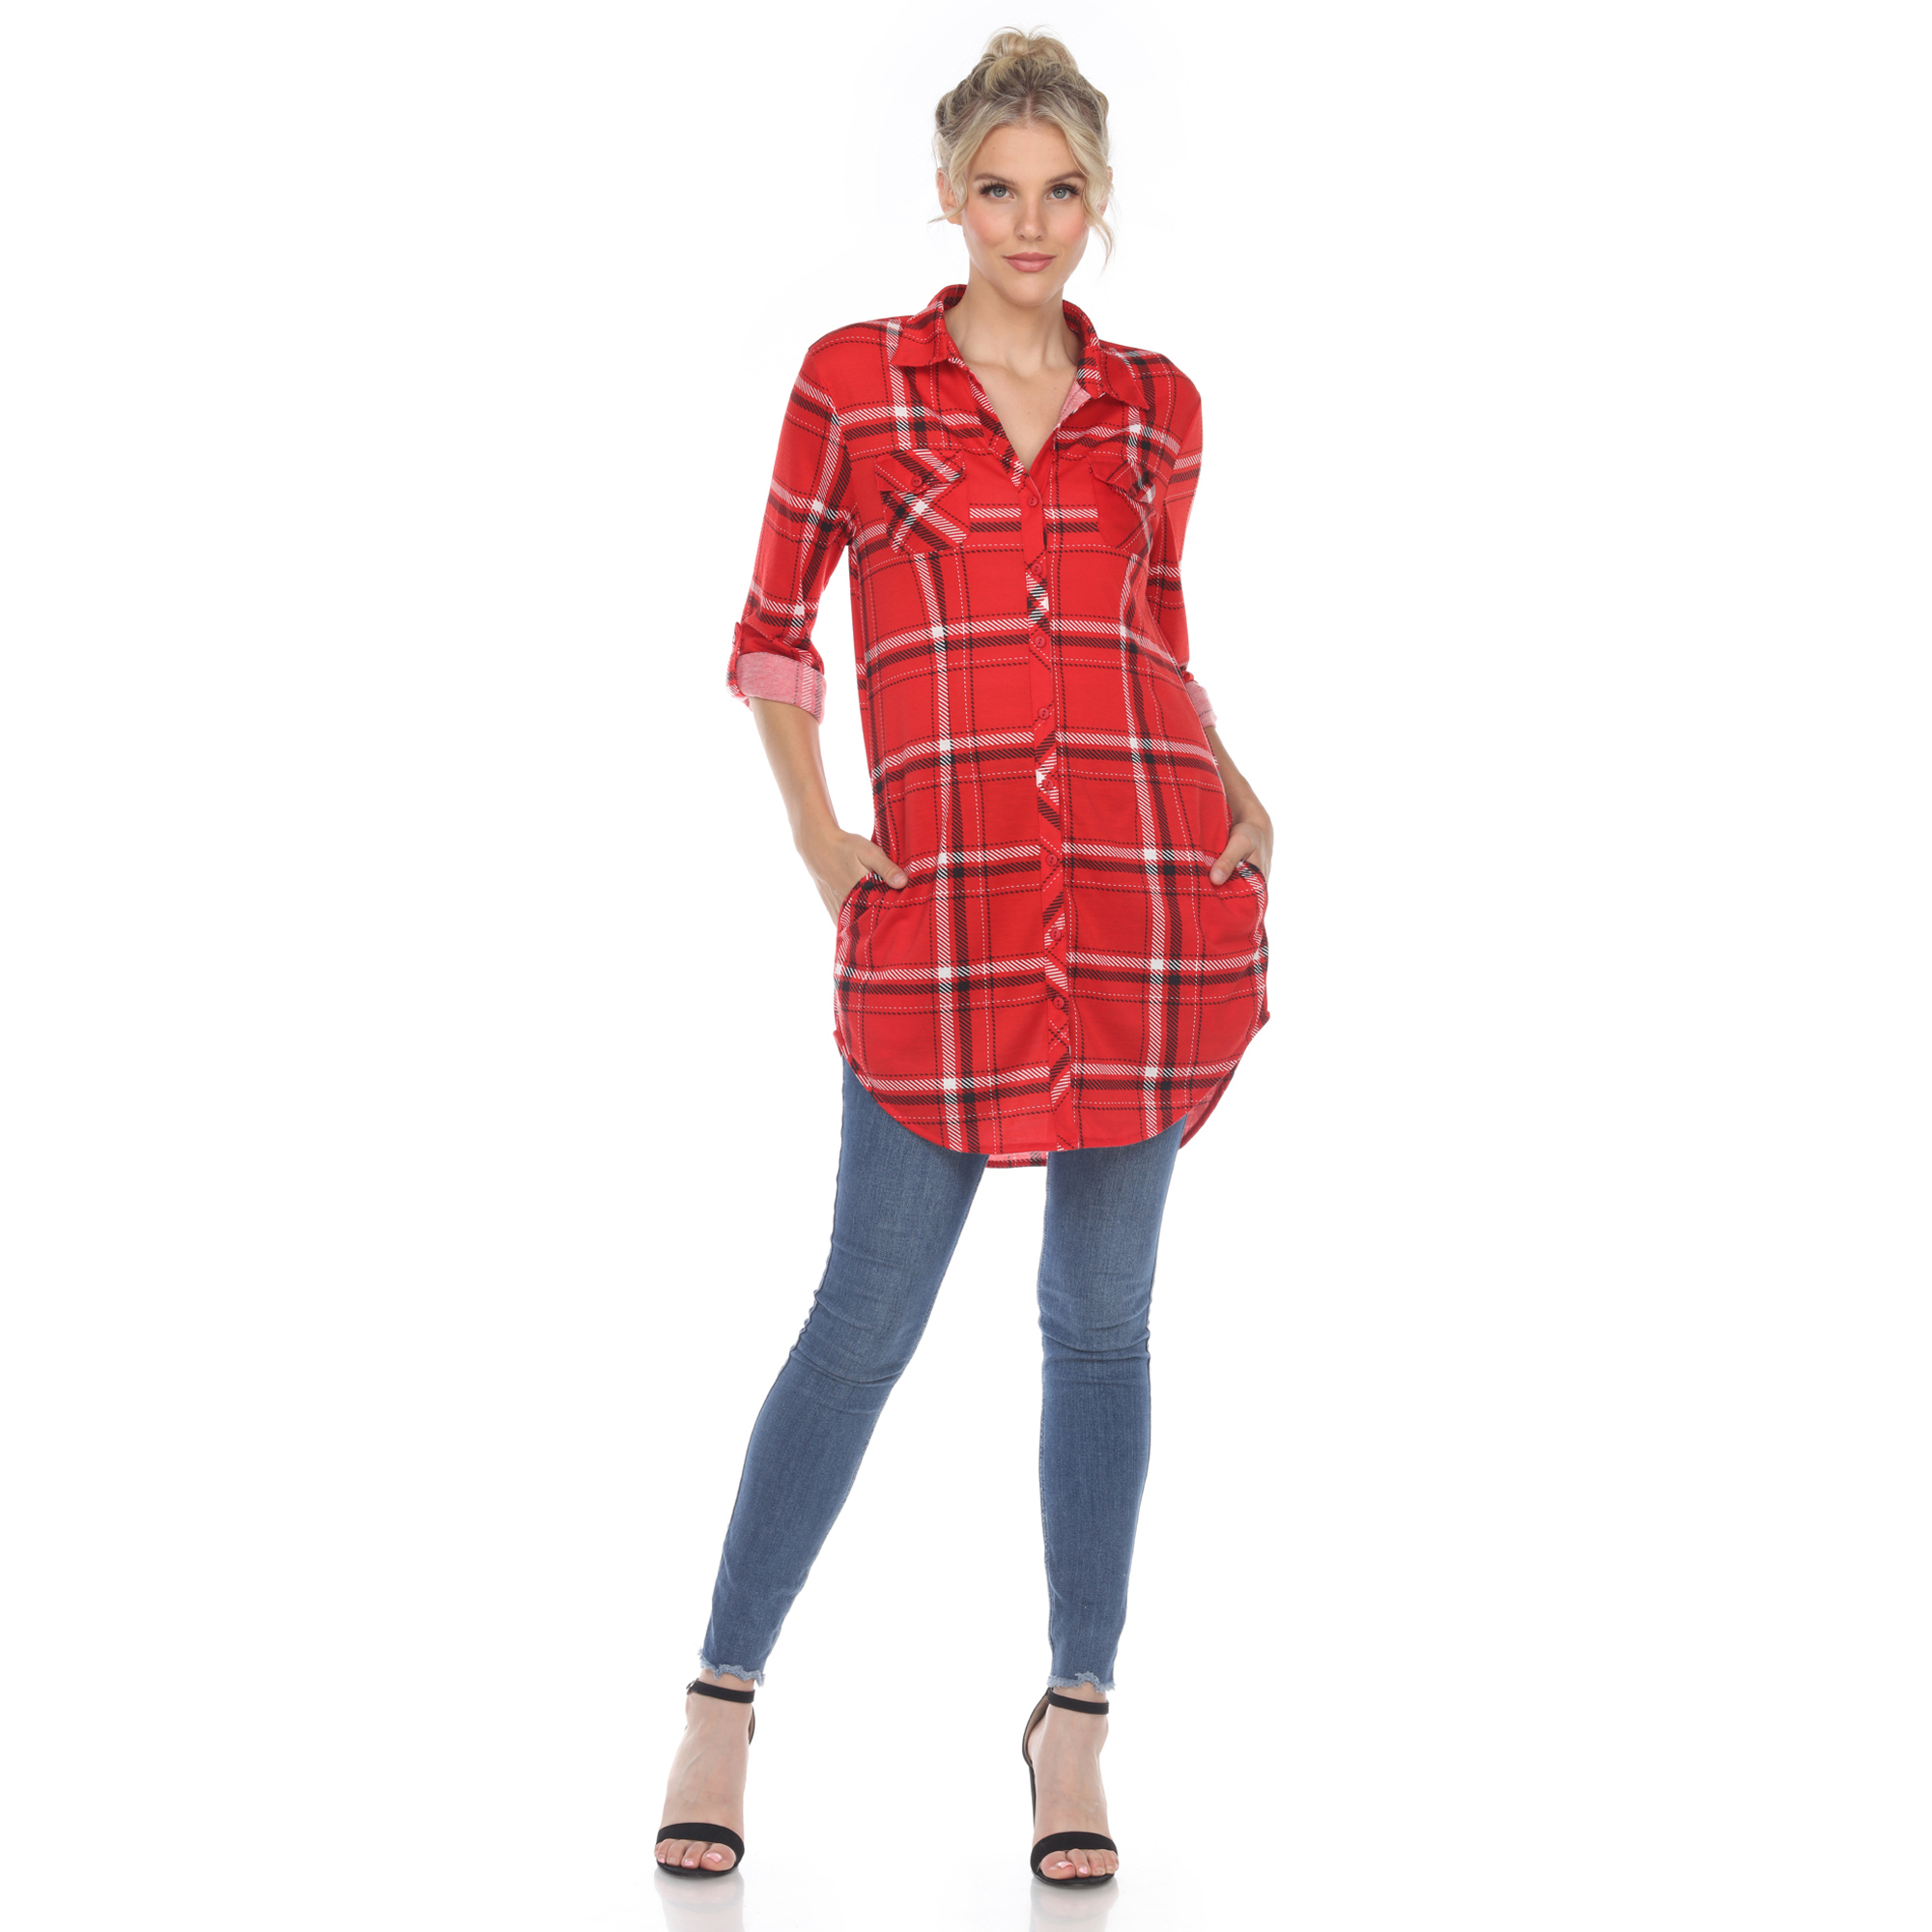 White Mark Women's Stretchy Windowpane Plaid Tunic Top - Red, Large